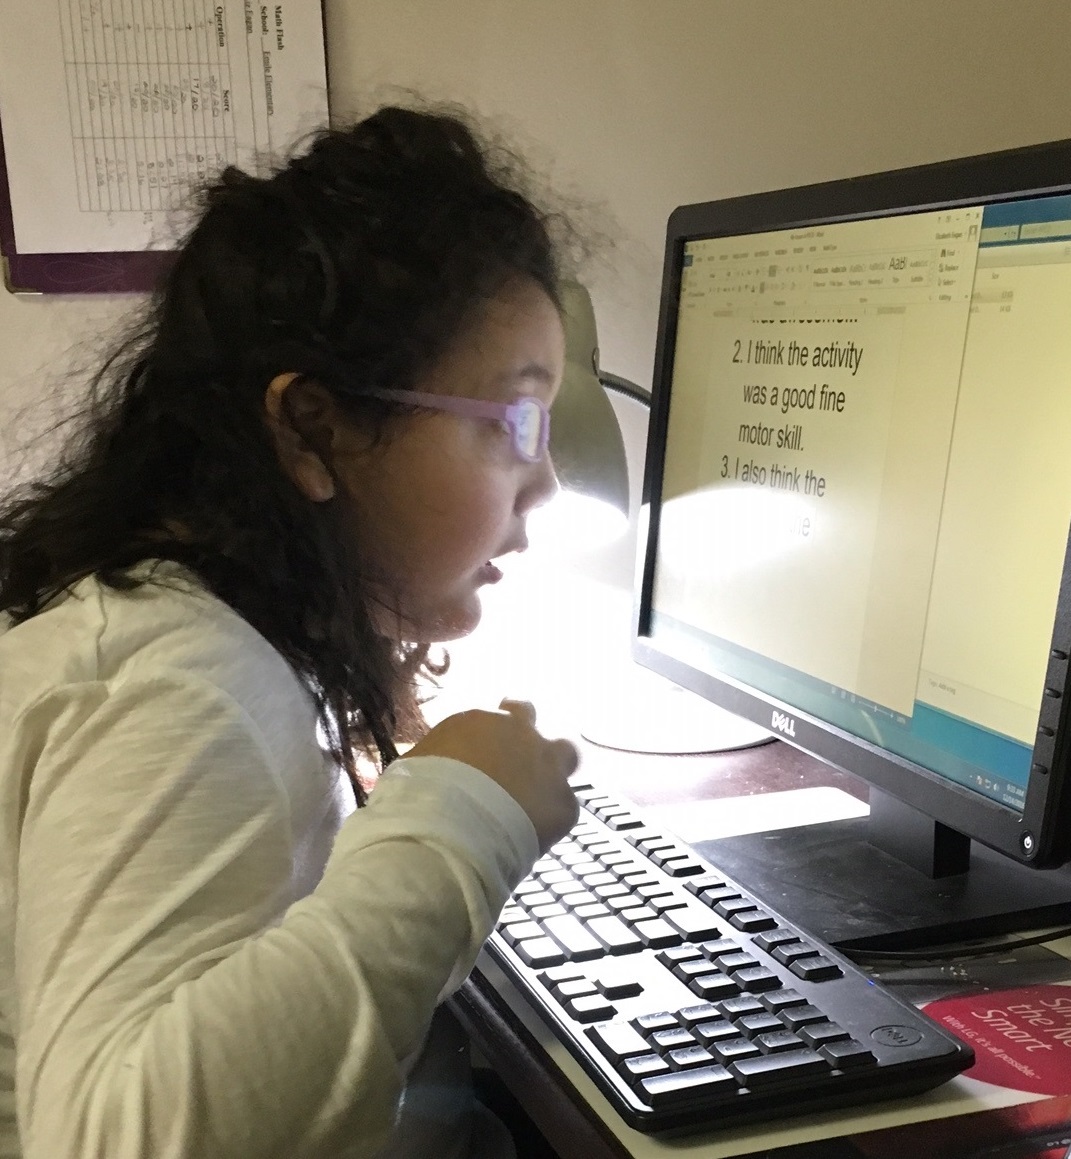 a student reading an evaluation on a computer screen